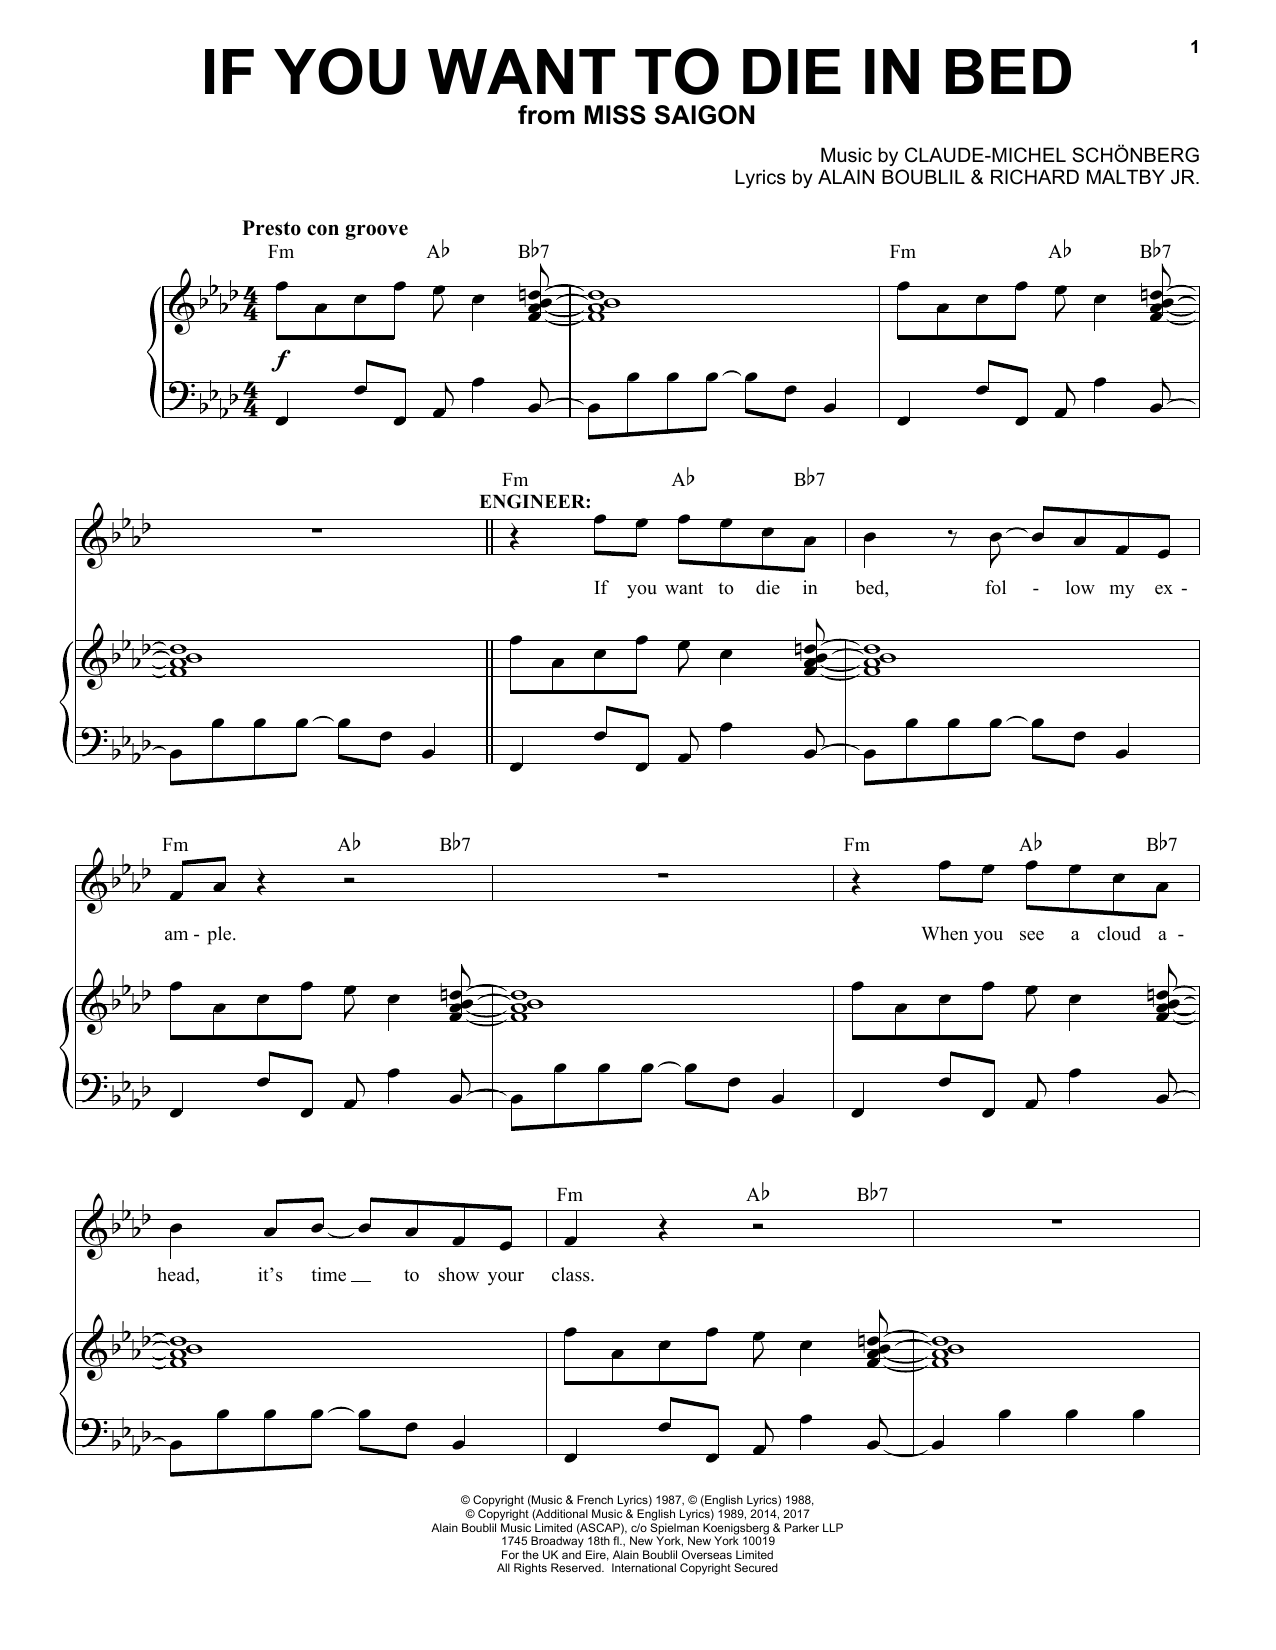 If You Want To Die In Bed (from Miss Saigon) sheet music